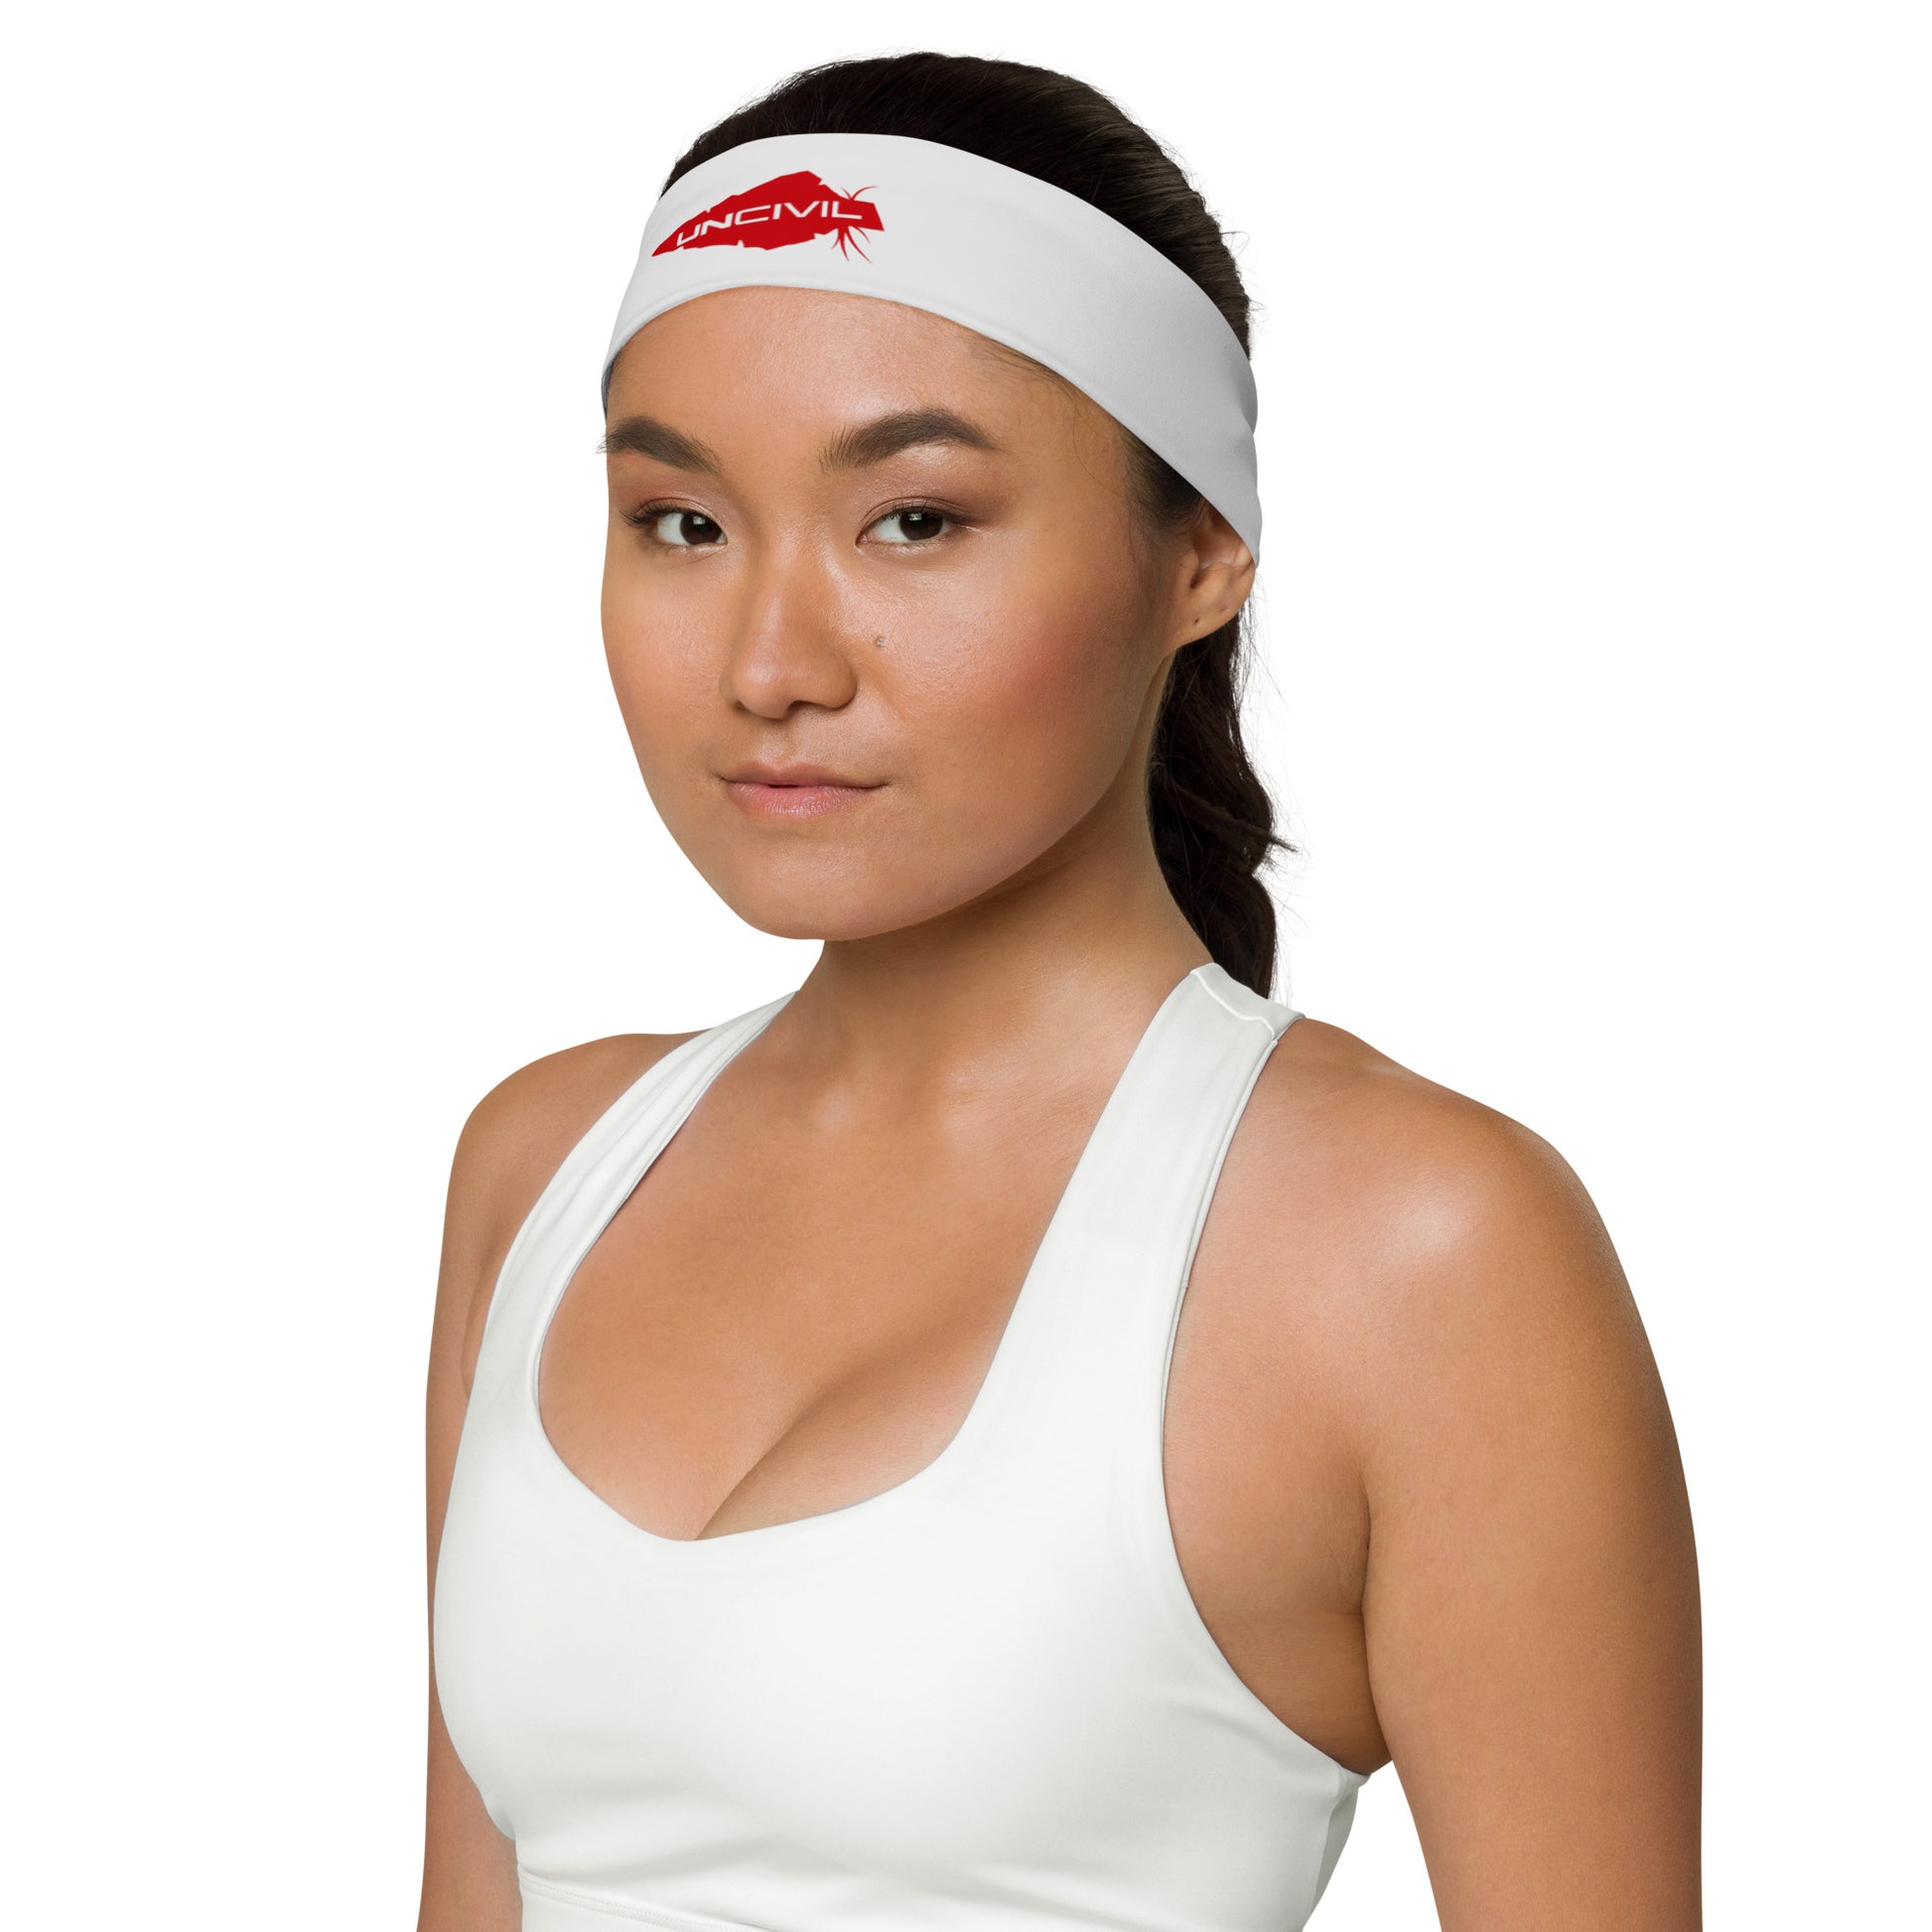 UNCIVIL Grey and Red Headband for men and women. Workout headband.